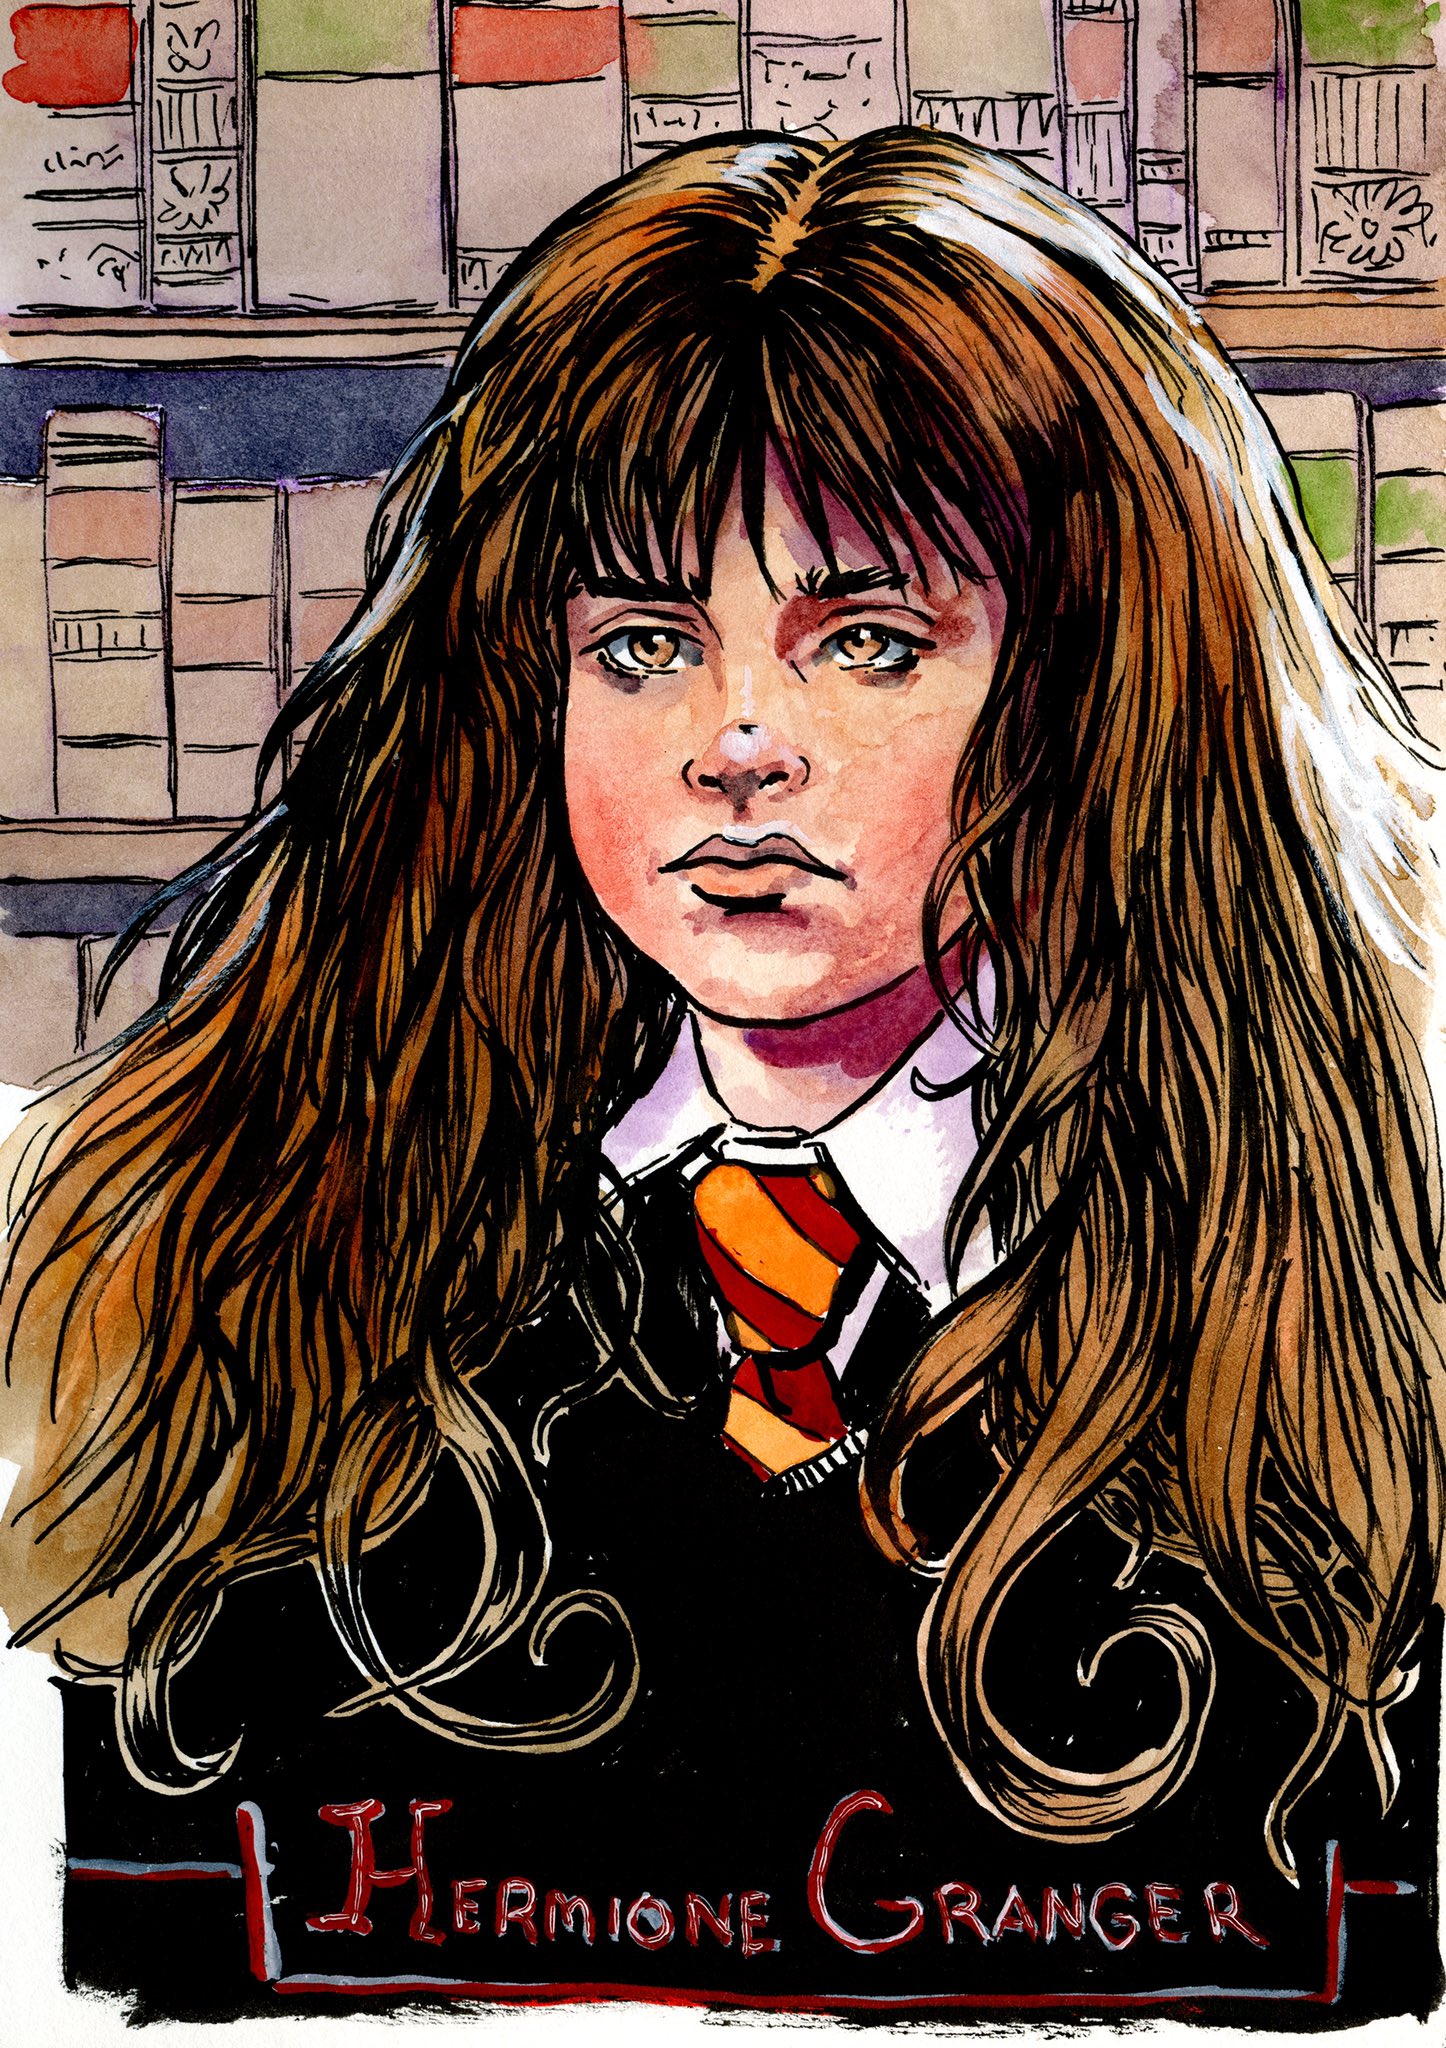 Hermione Character  Illustration by Milena Trifonova on Dribbble